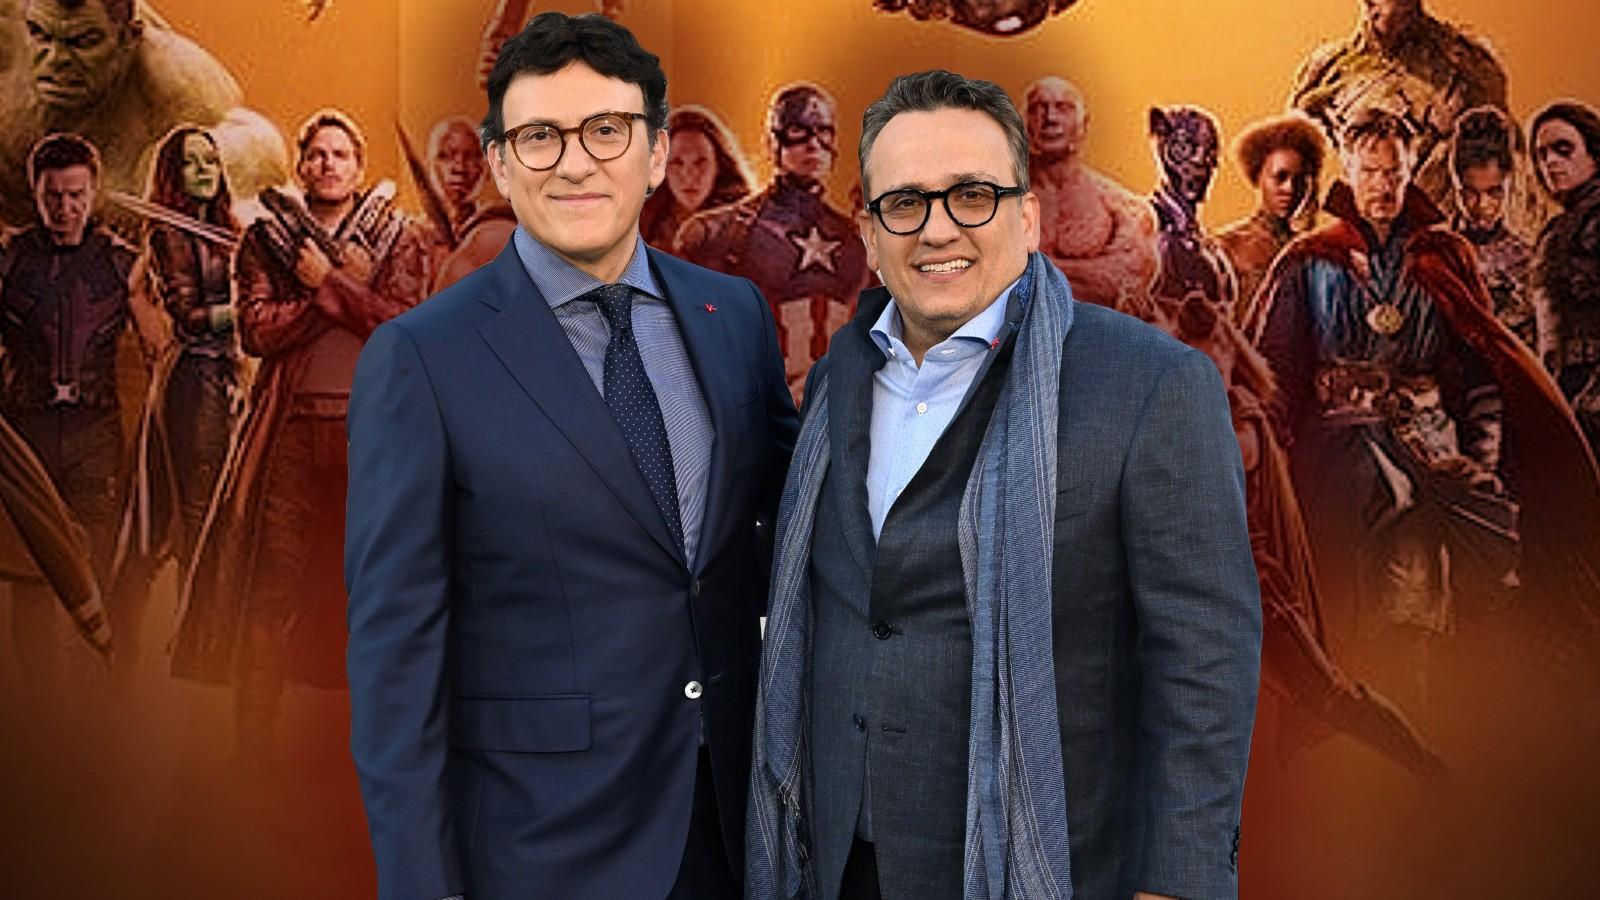 Russo Brothers in front of the Avengers